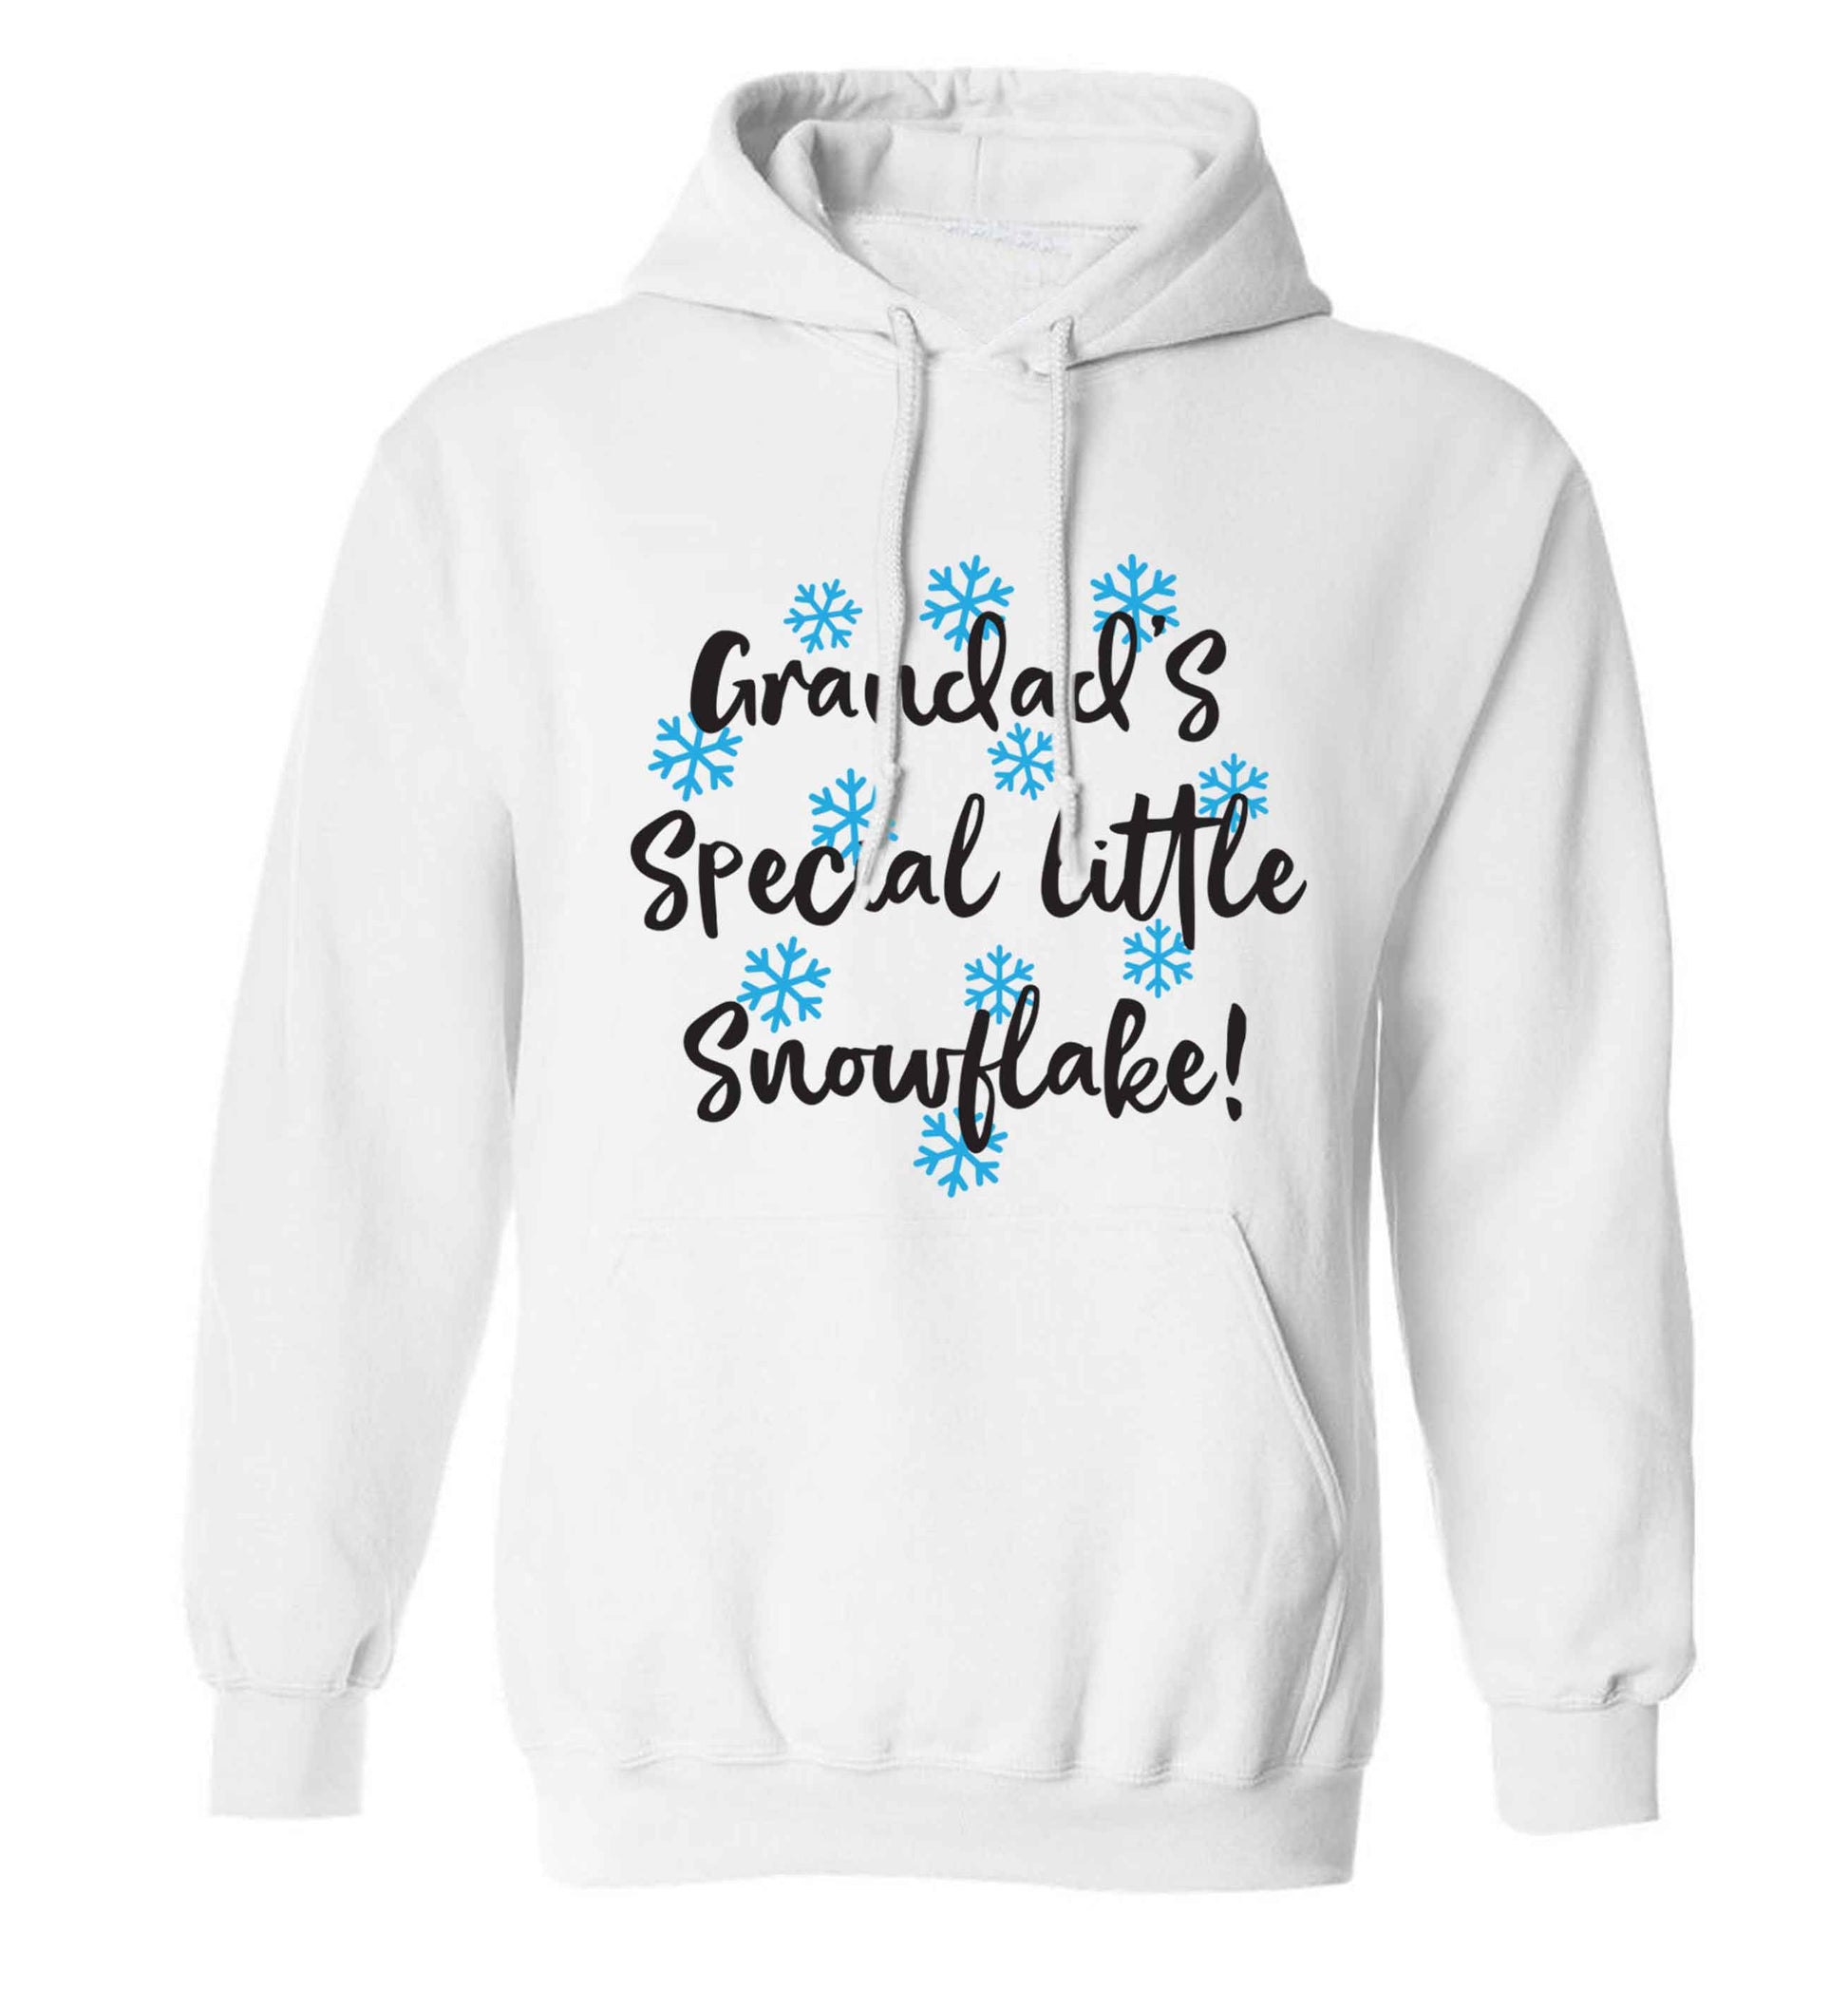 Grandad's special little snowflake adults unisex white hoodie 2XL